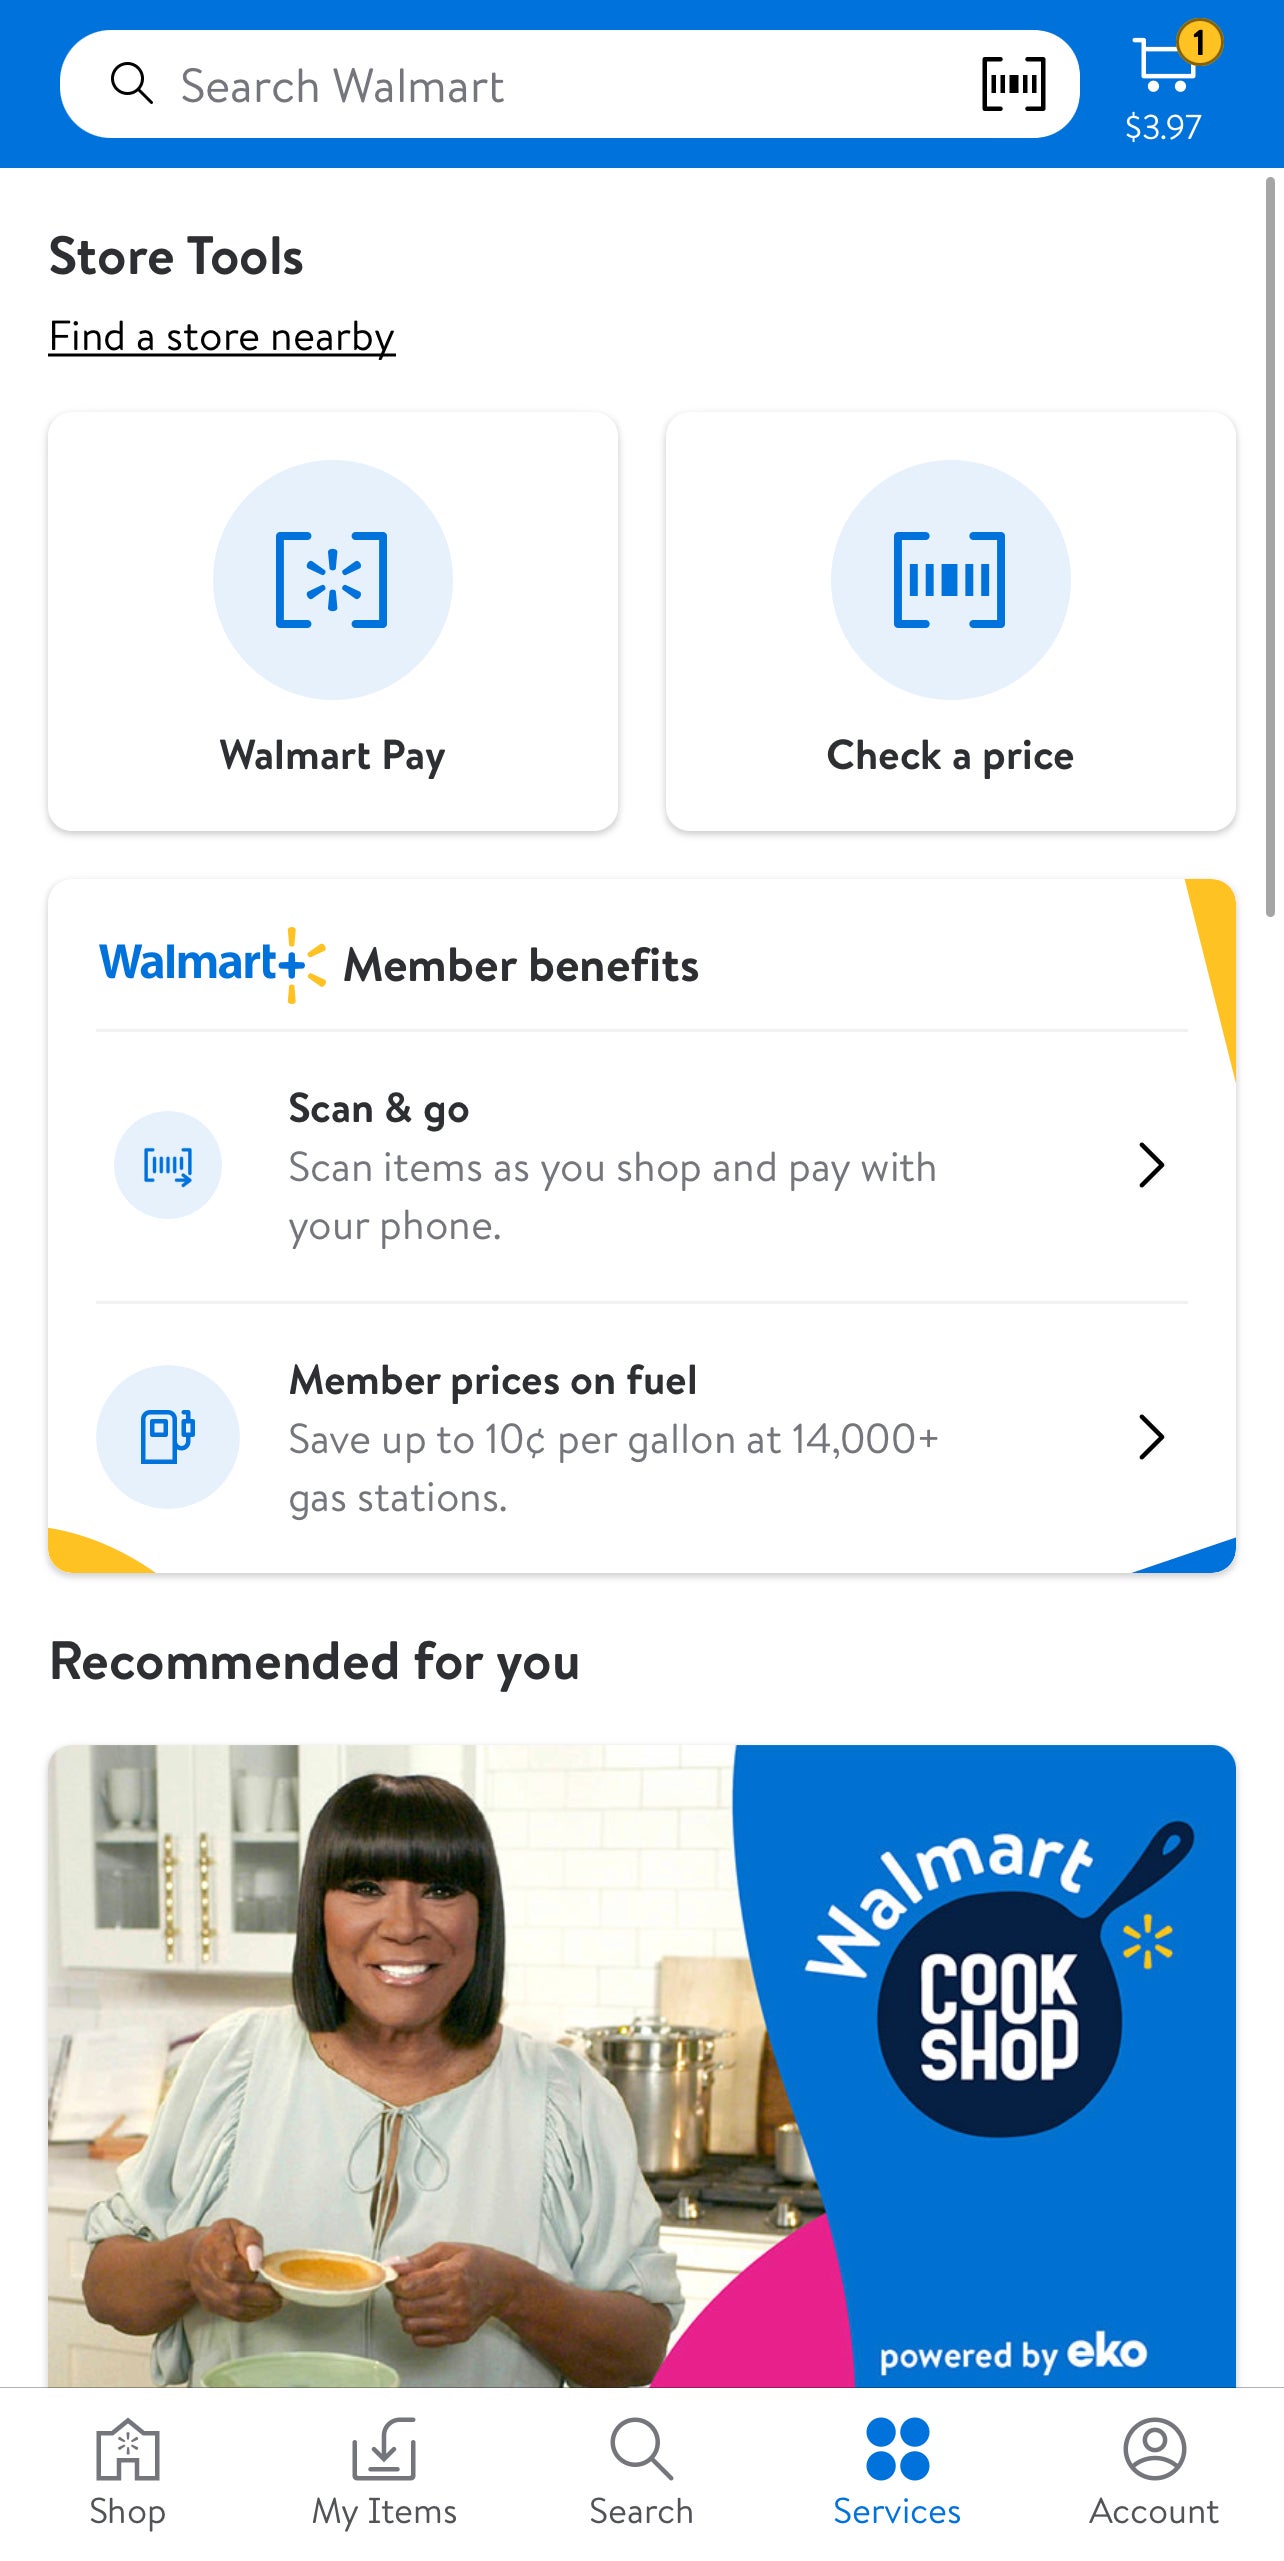 Services tab in the Walmart app